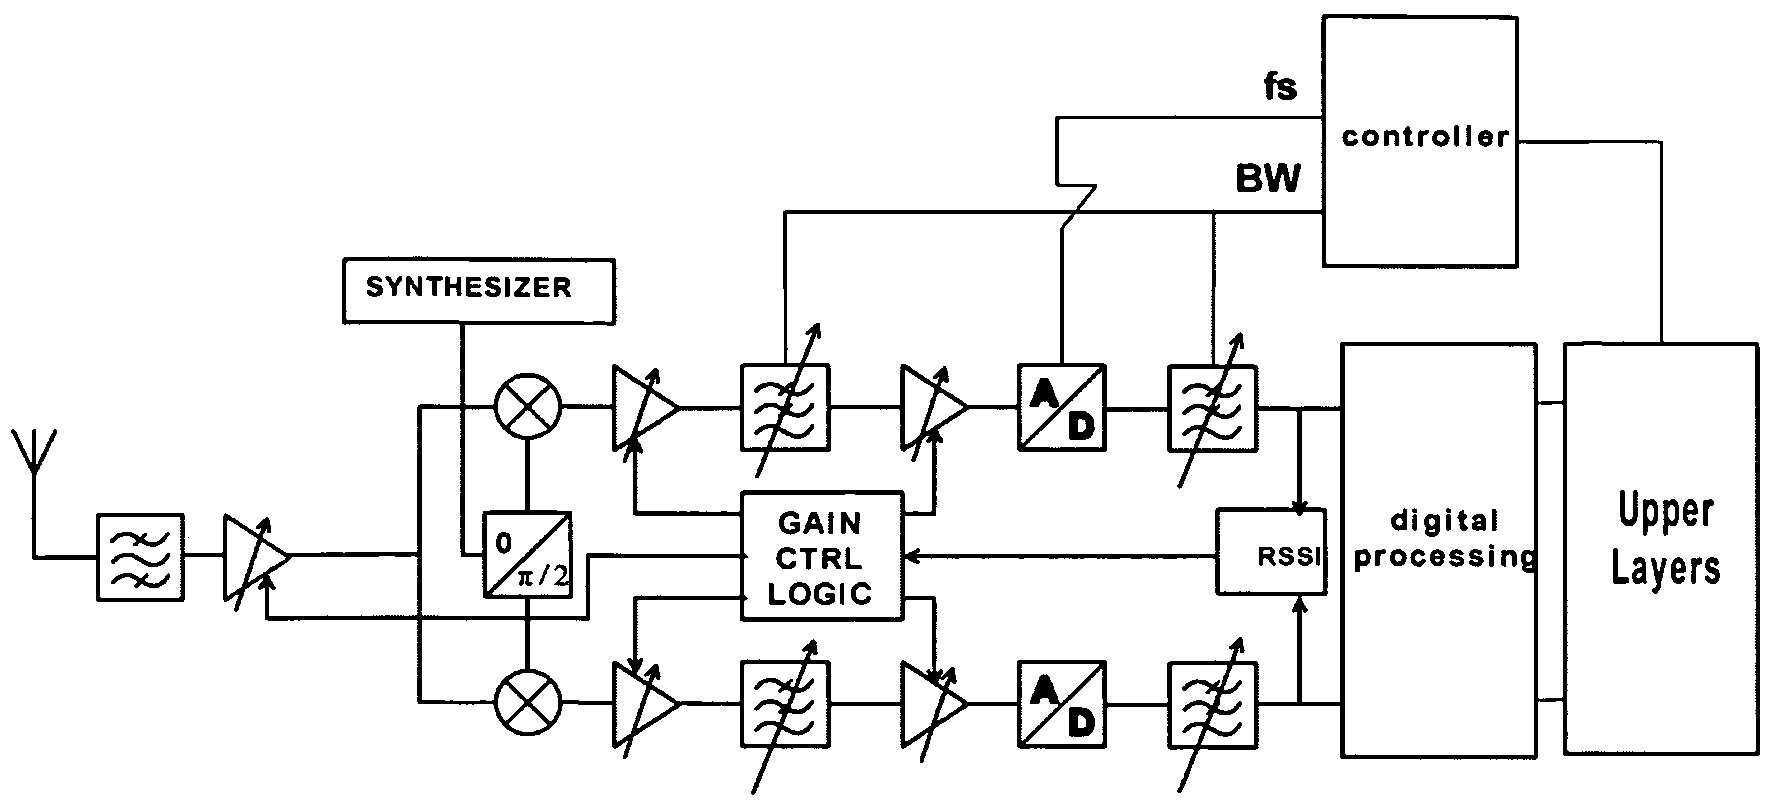 Variable bandwidth in a communication system